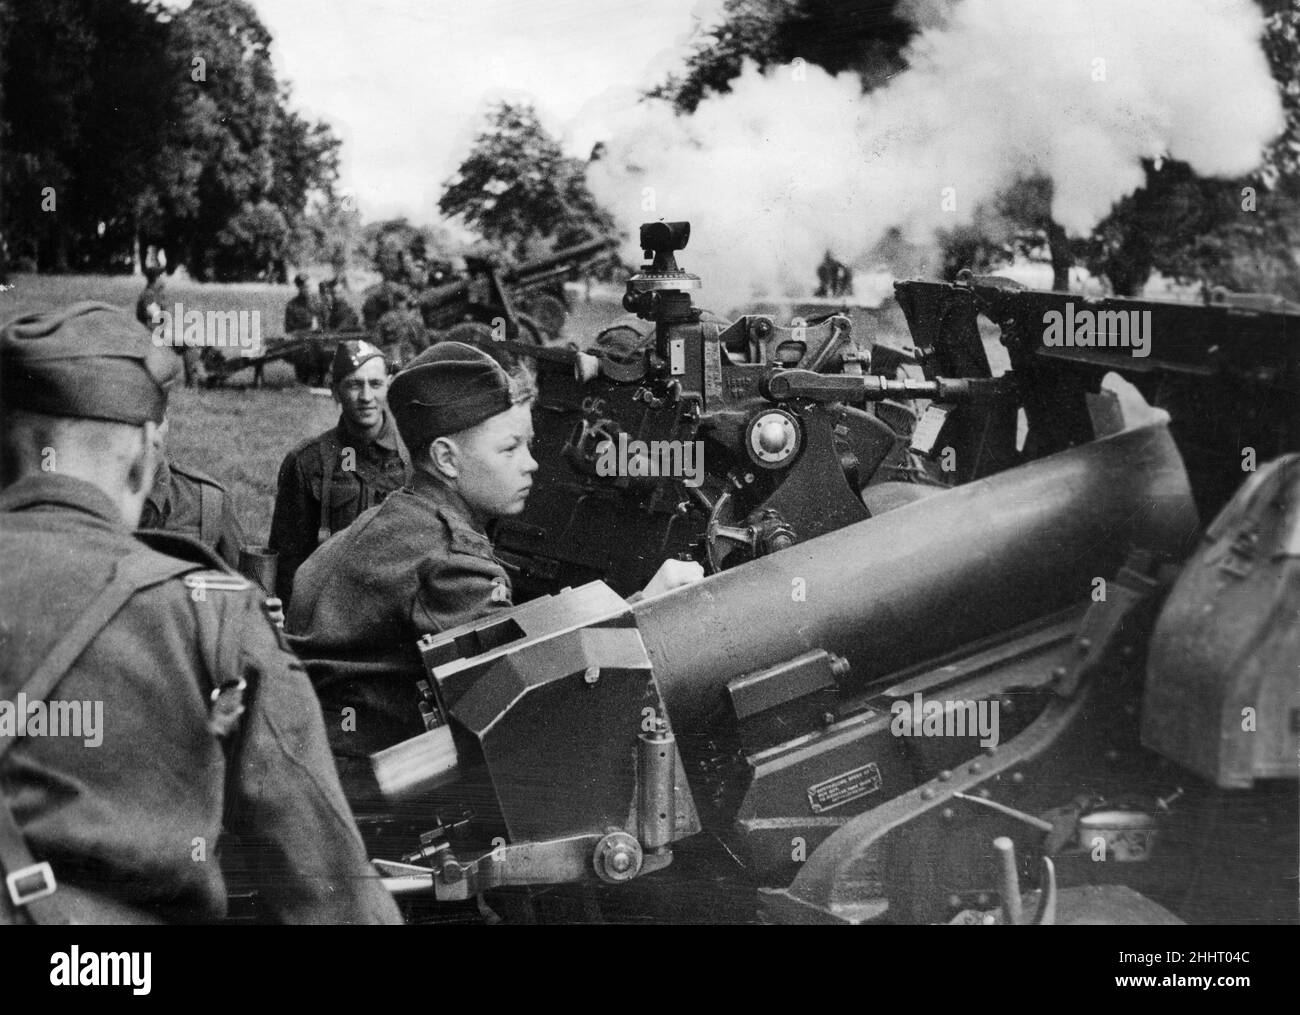 Cadet camp, 1942. Boy cadets aged 14-17 years old learning the craft of modern soldiering. OPS Devon cadets firing 25 pounder guns.18th August 1942. Stock Photo